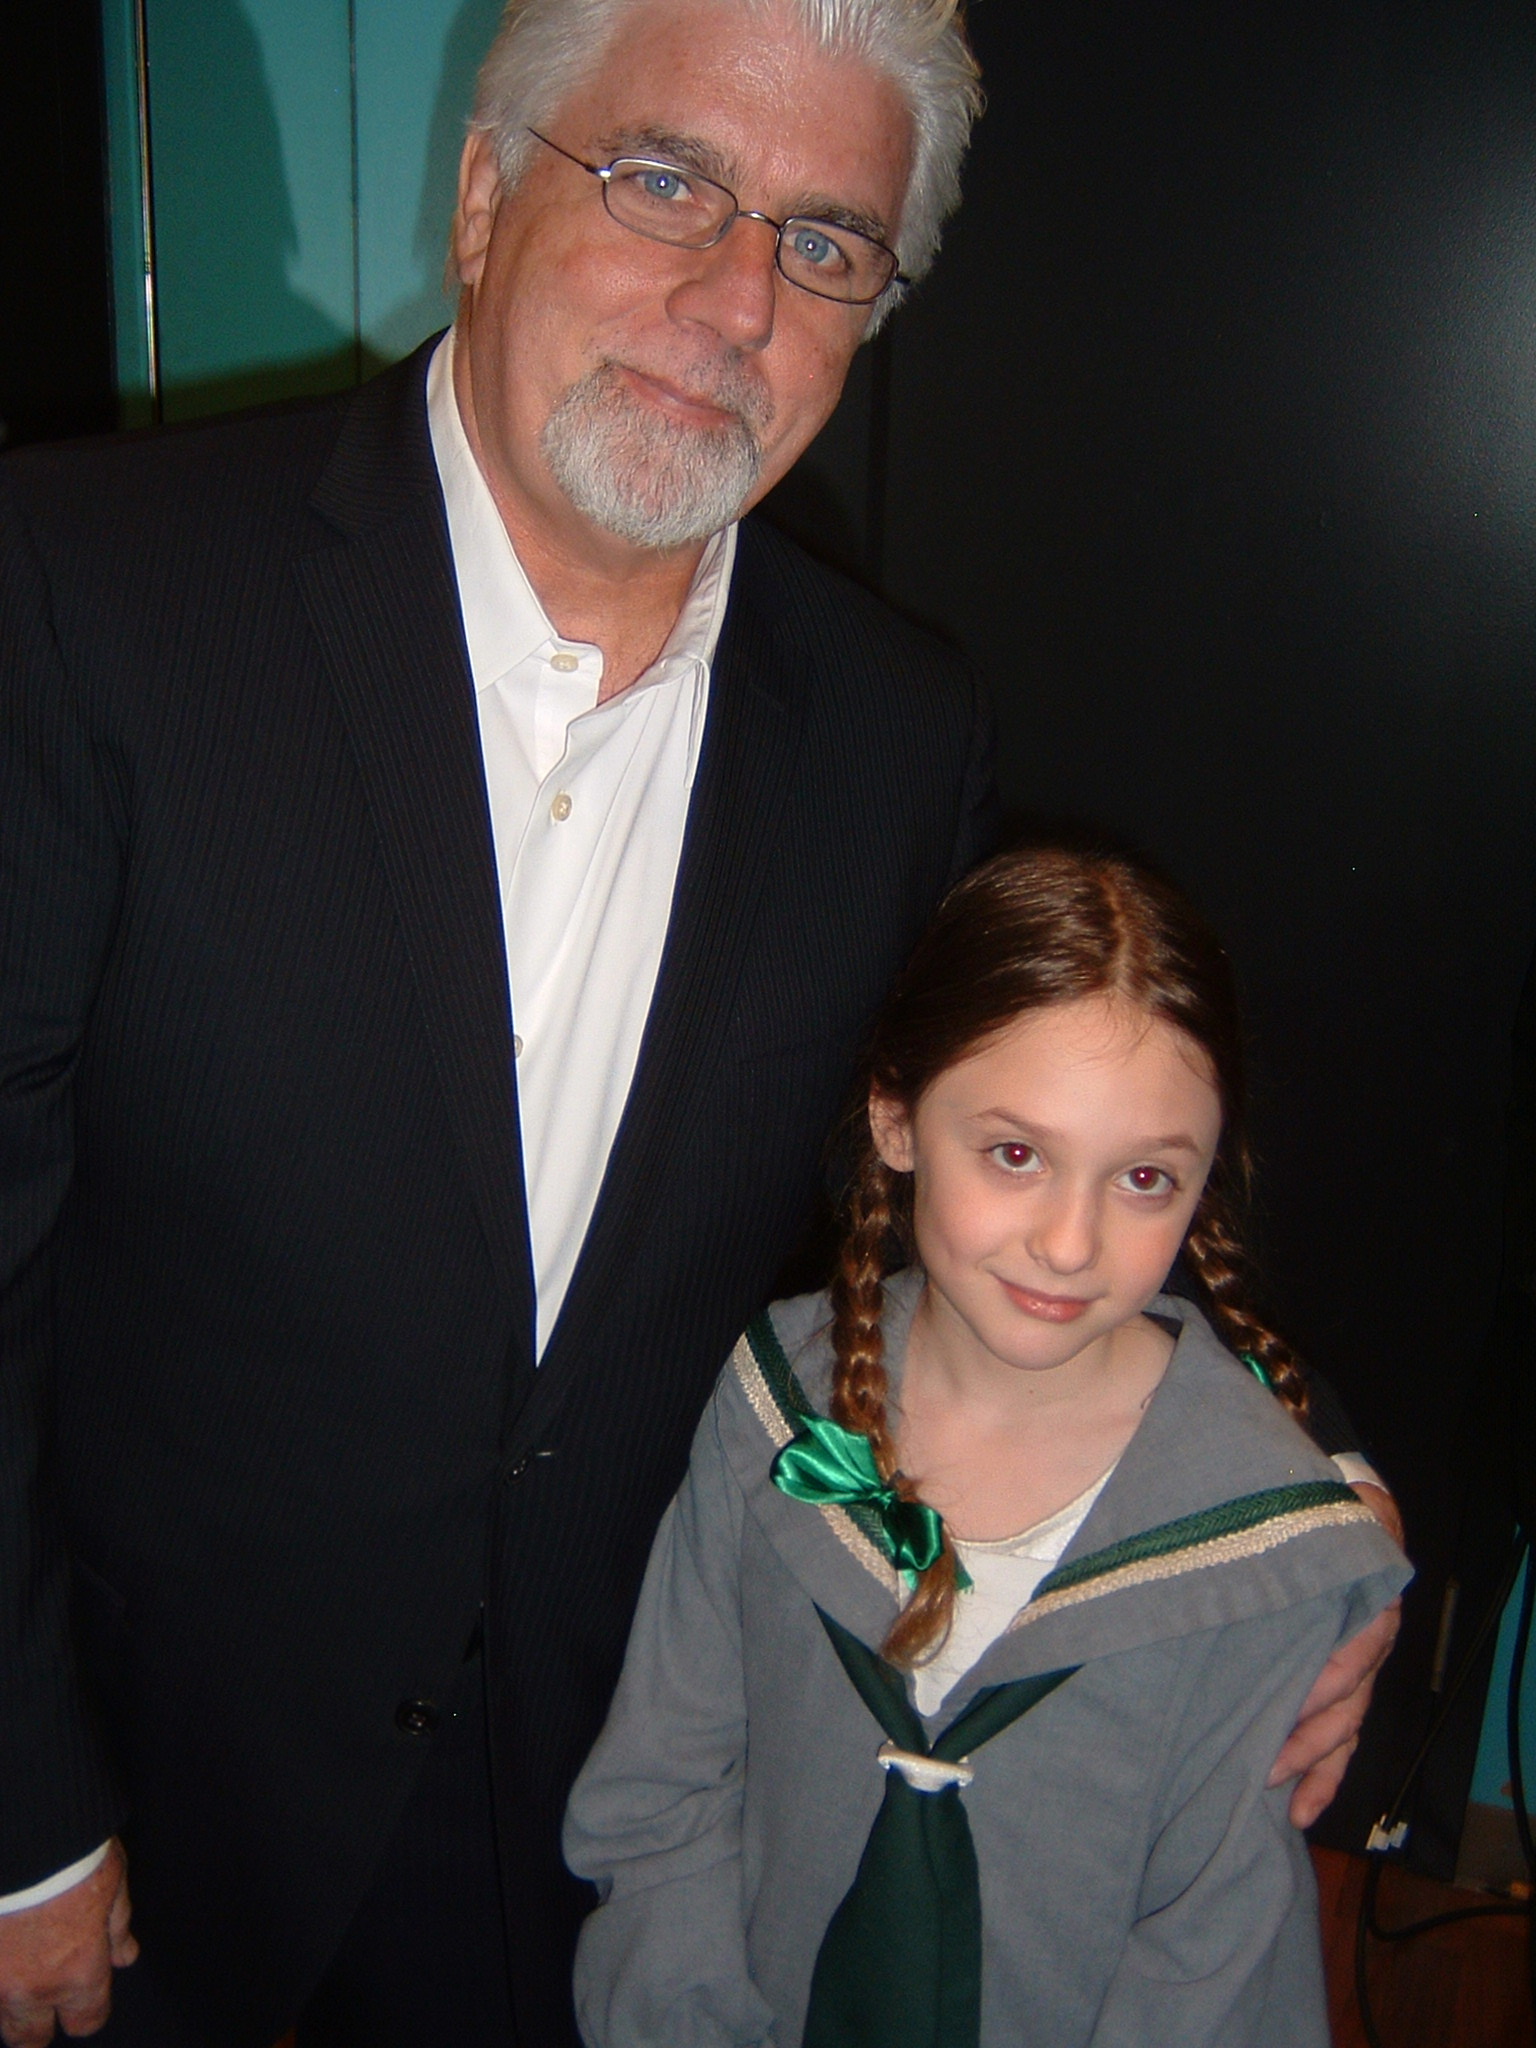 Jaclyn & Michael McDonald Back Stage at 